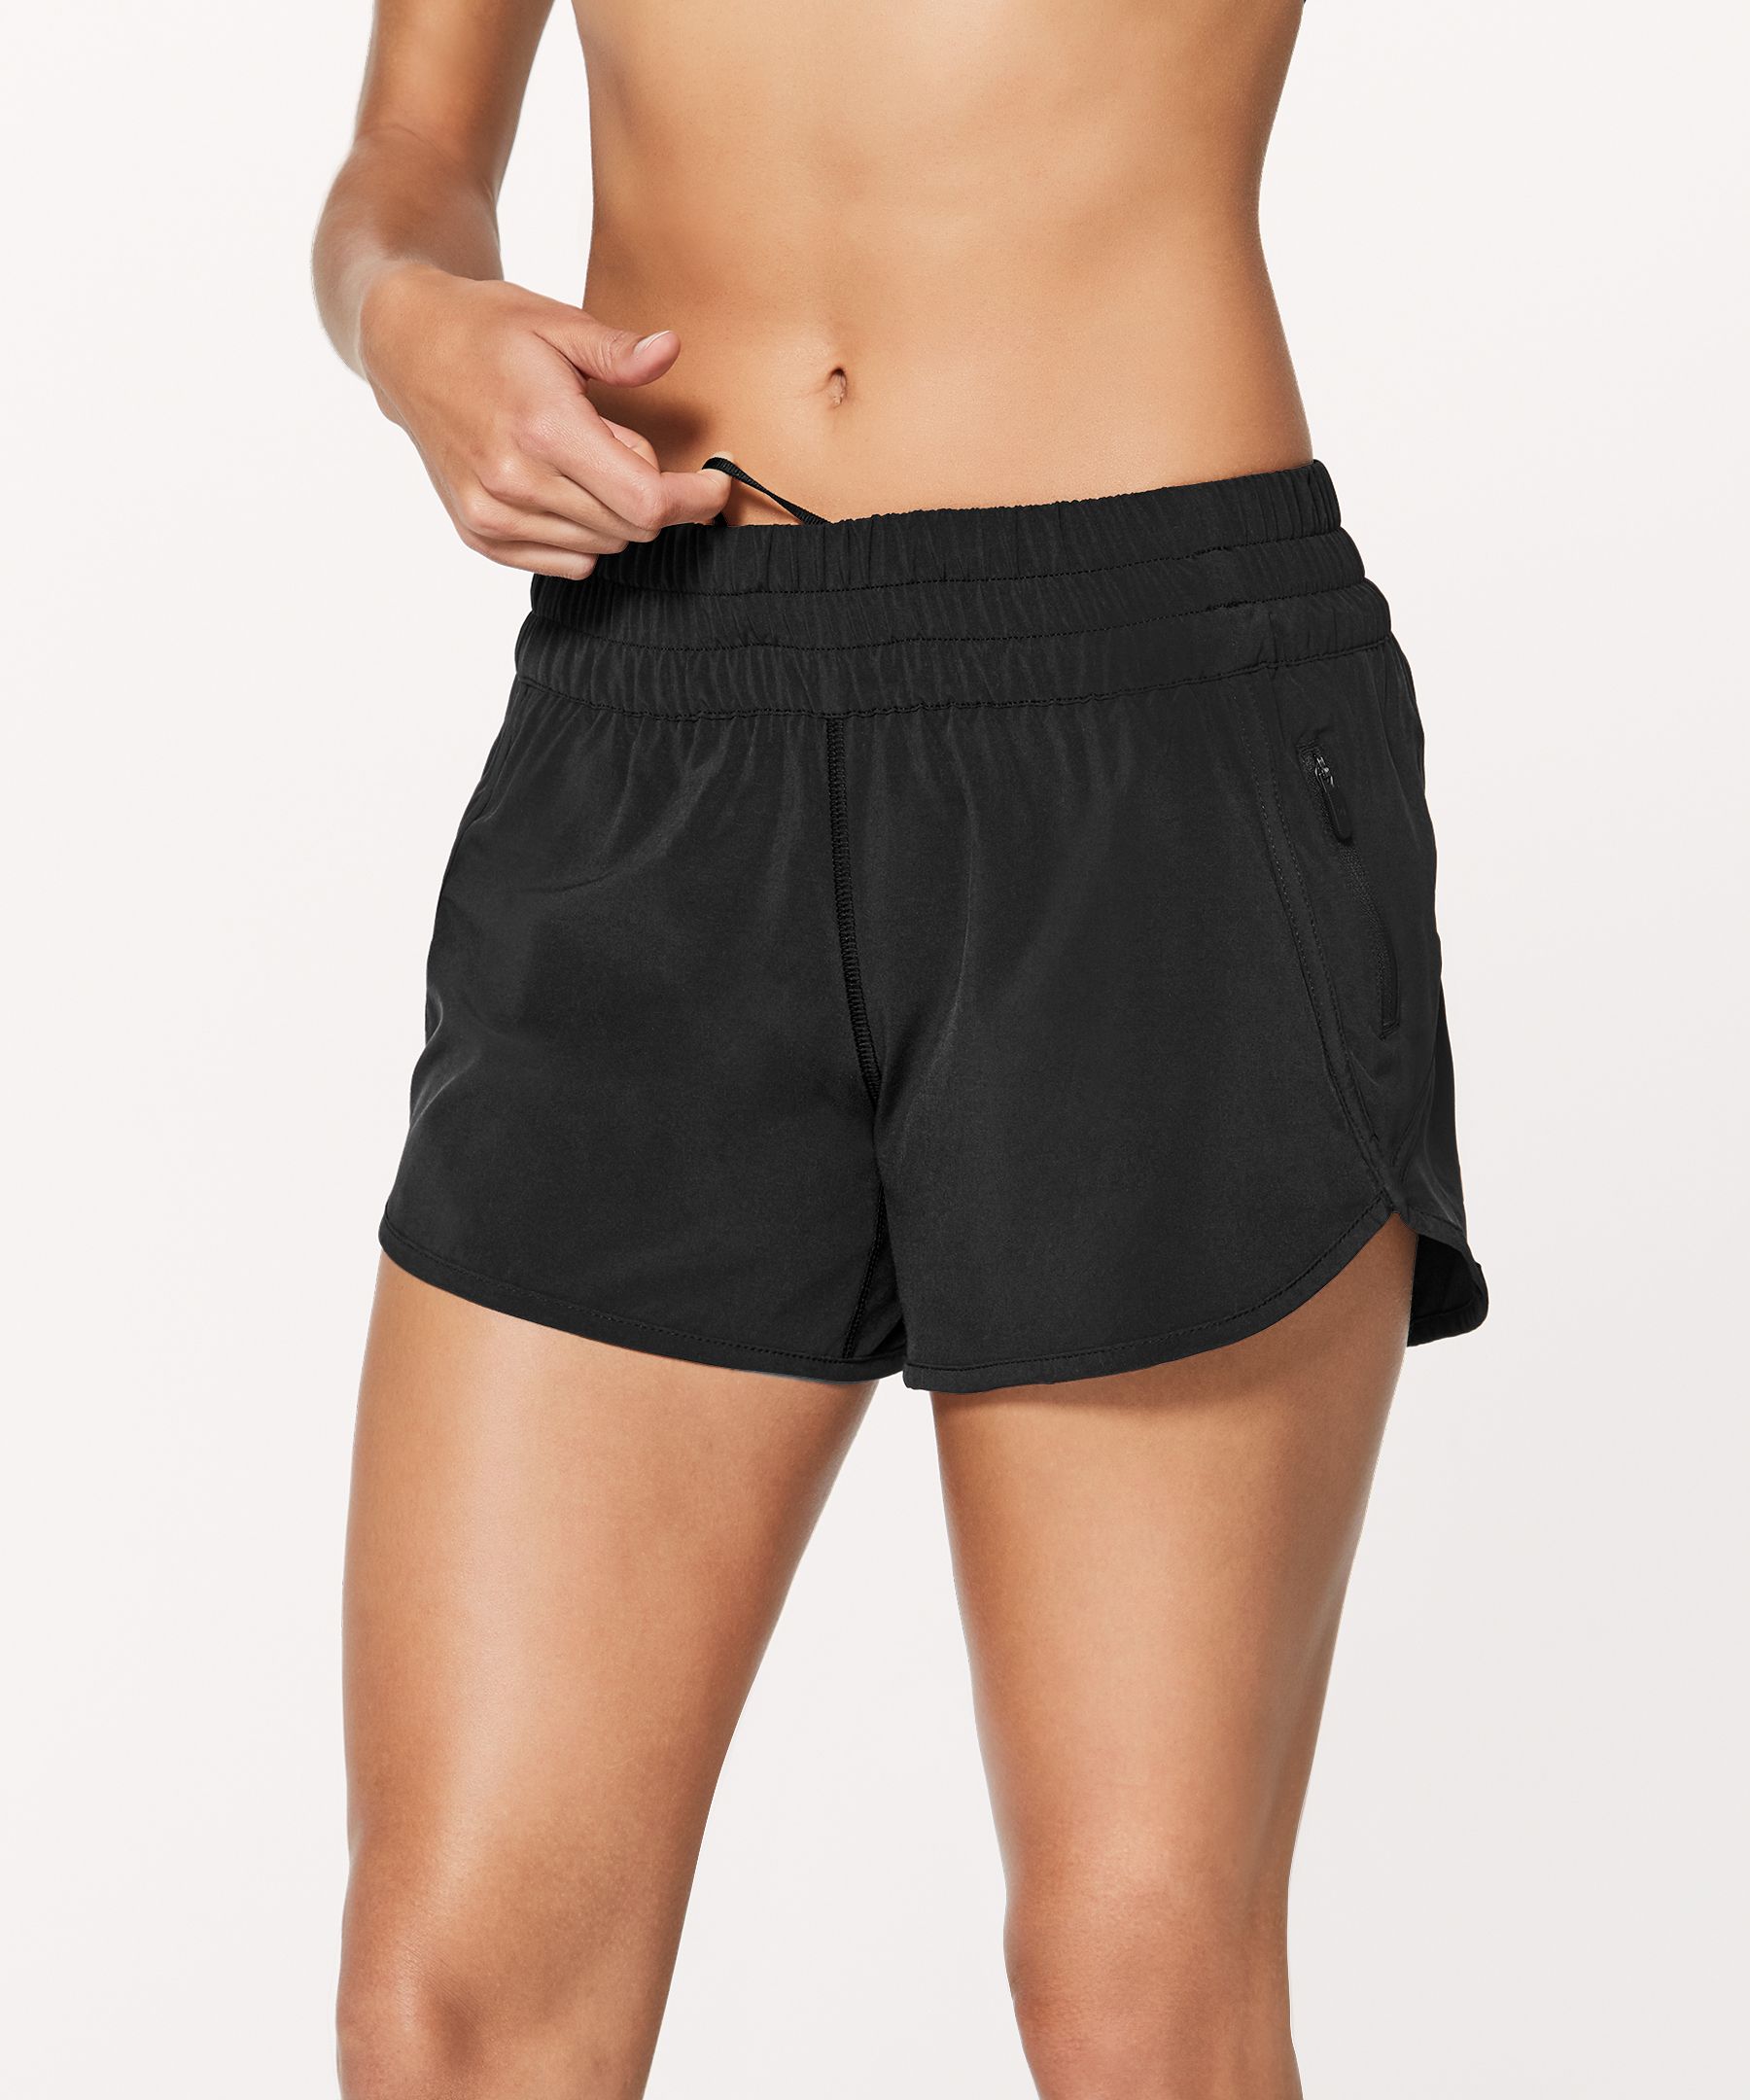 What Are The Lululemon Dupes